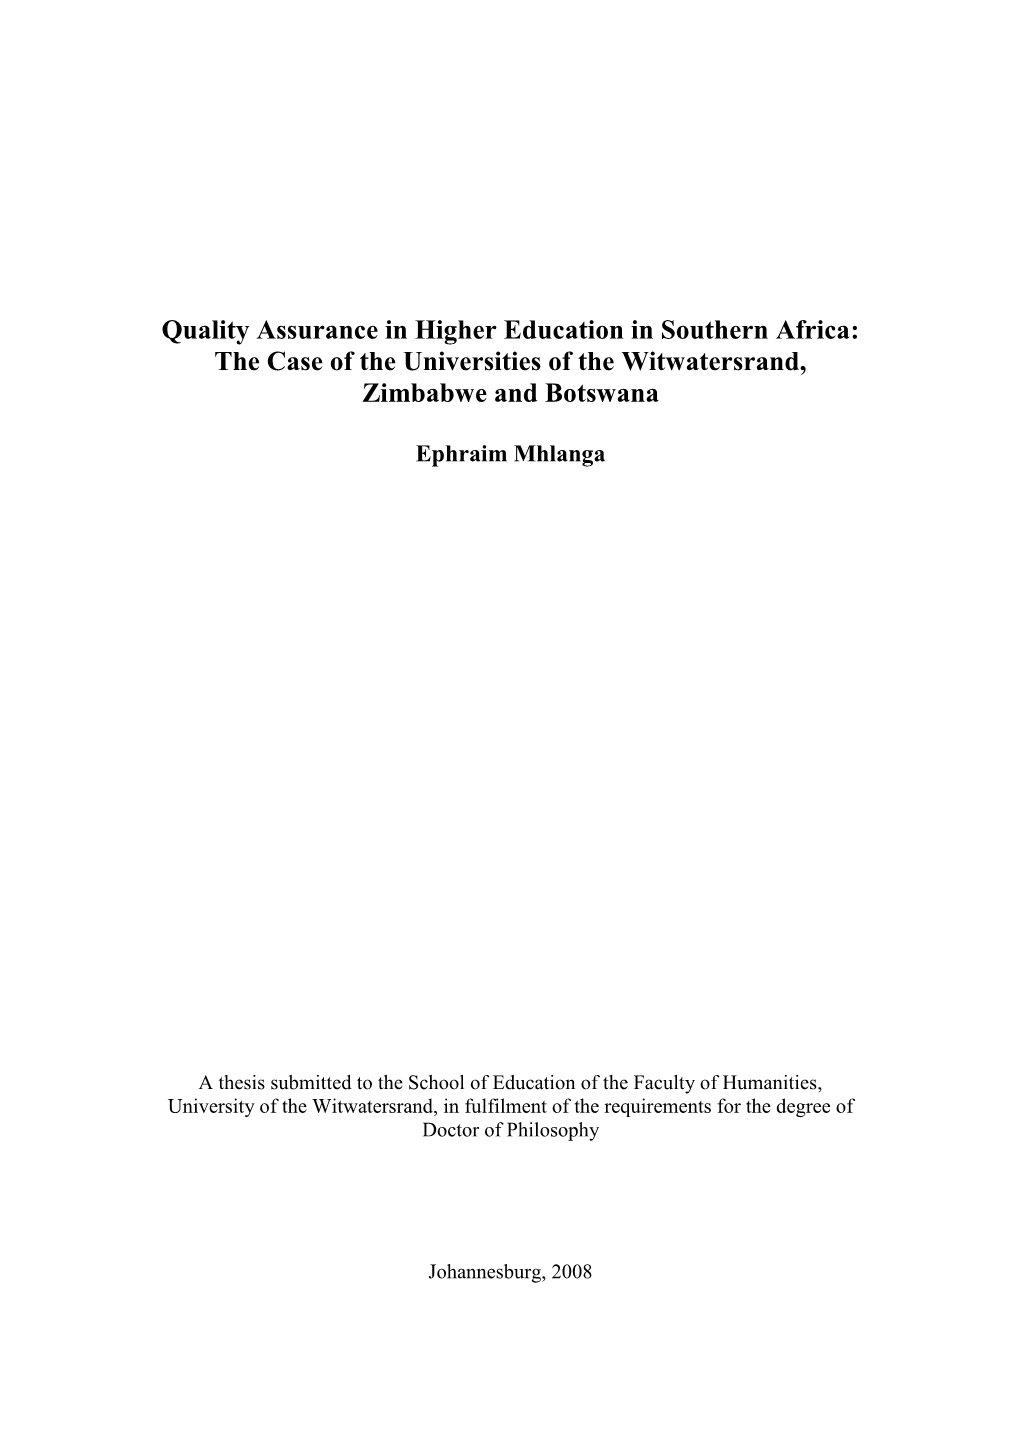 Quality Assurance in Higher Education in Southern Africa: the Case of the Universities of the Witwatersrand, Zimbabwe and Botswana